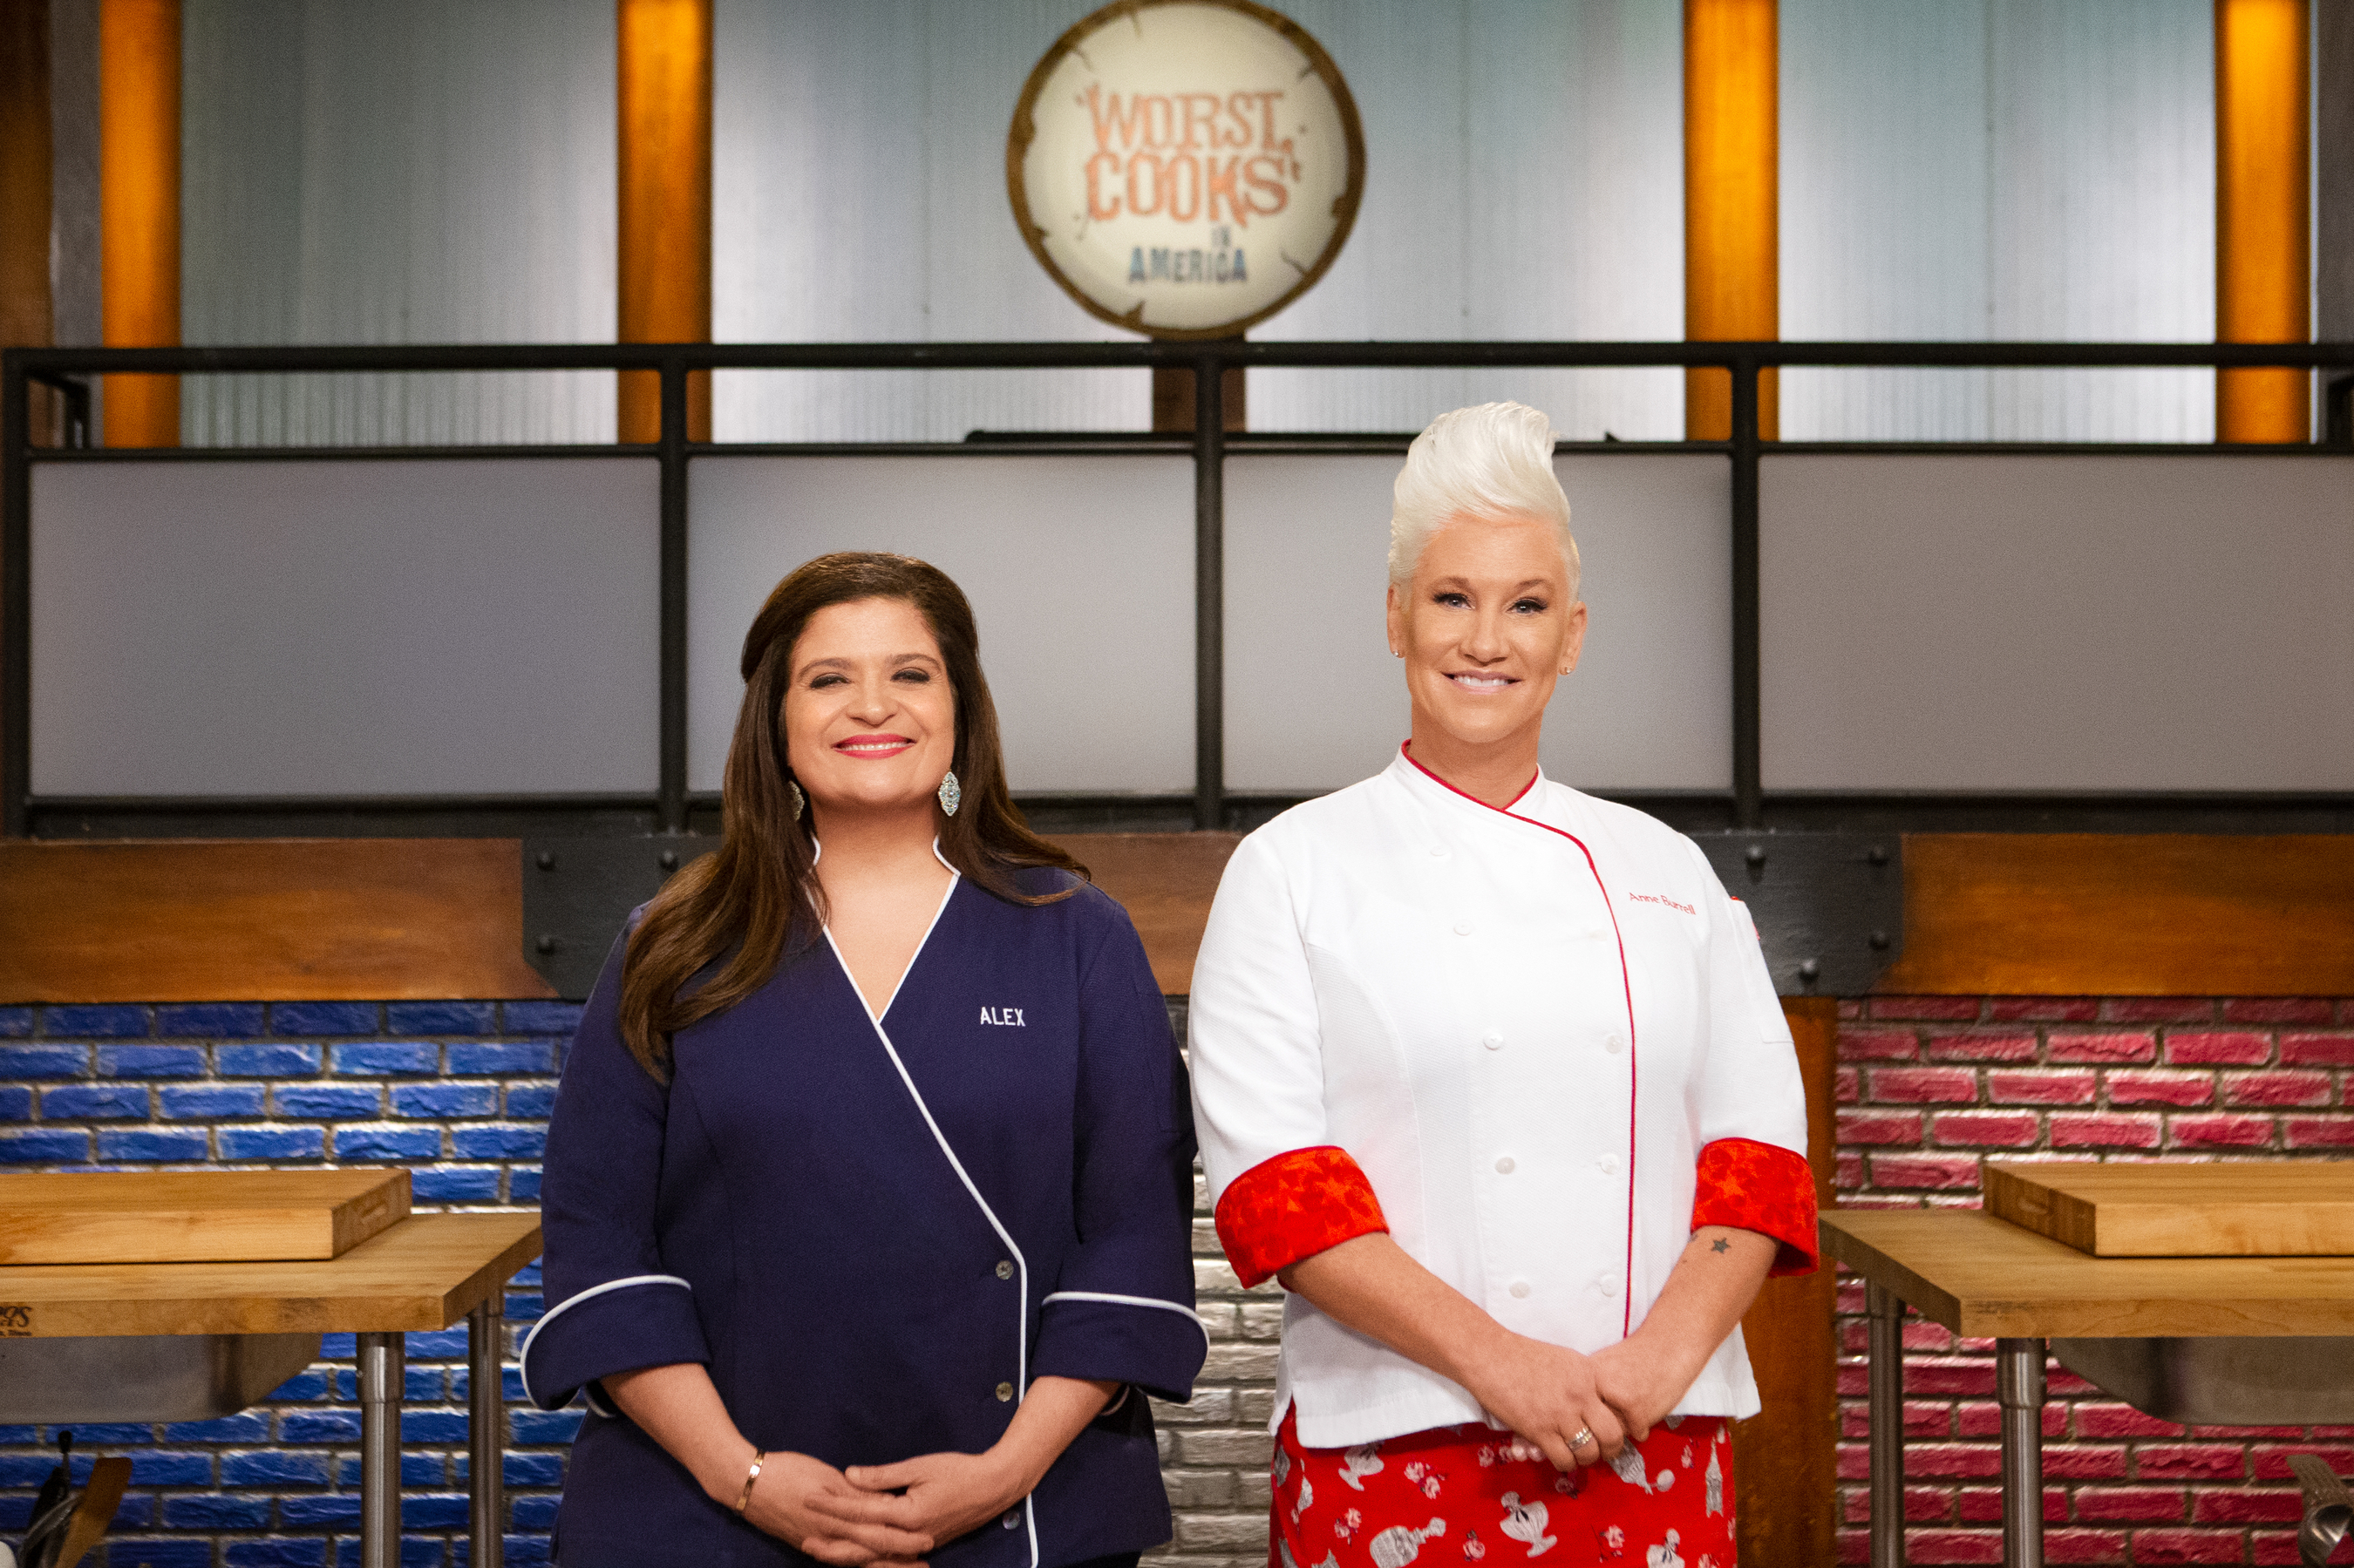 Season 20 welcomes 14 new self-confessed kitchen klutzes to culinary bootca...